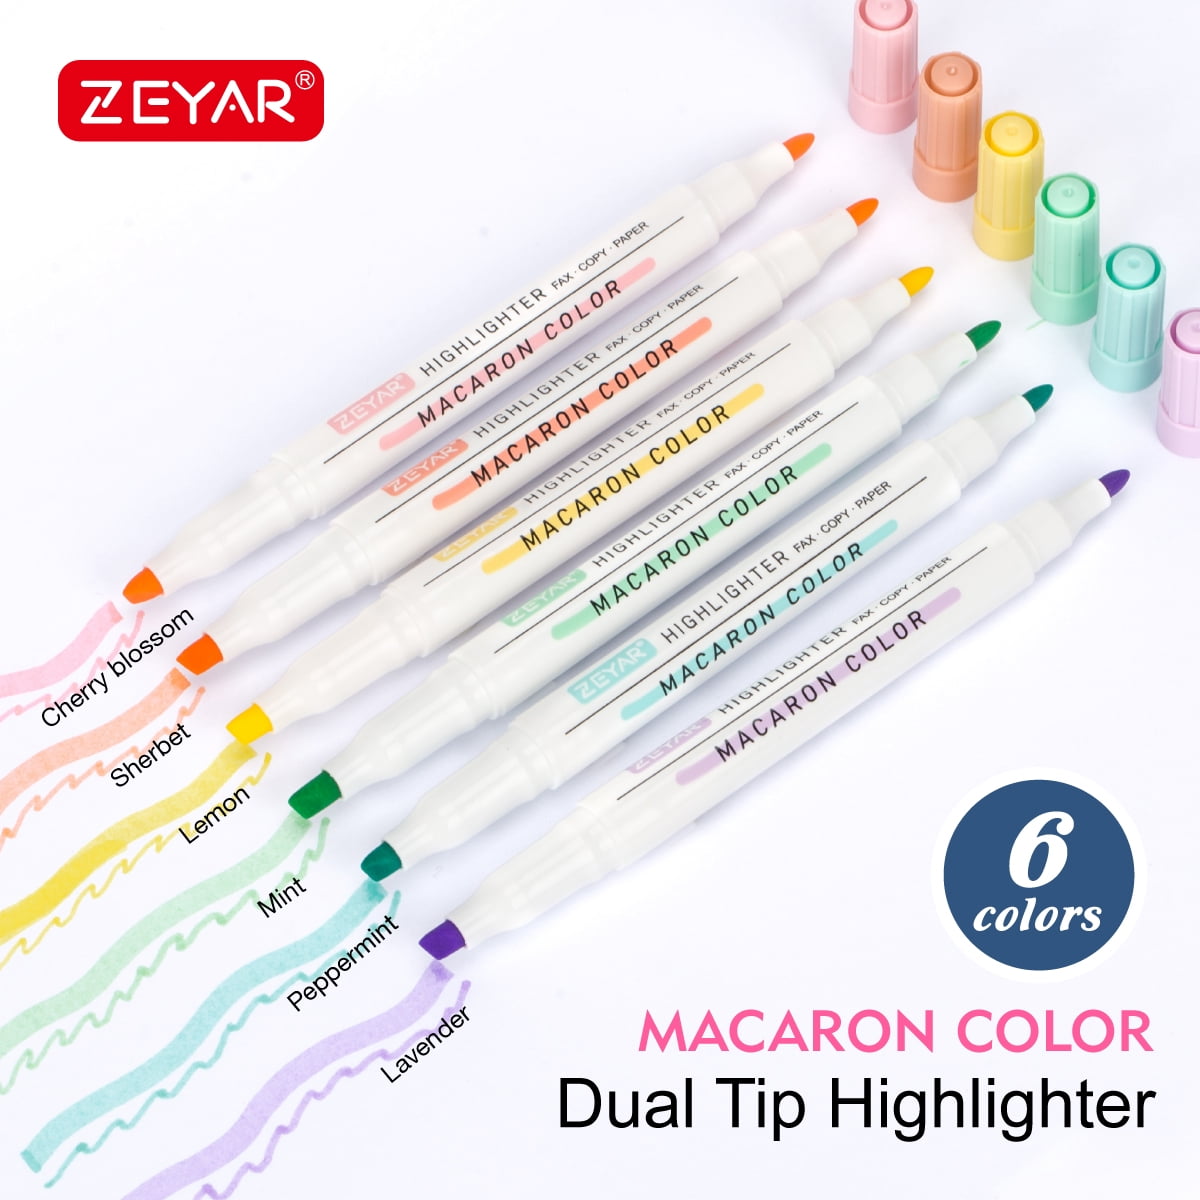 ZP2091-12 ZEYAR Aesthetic Highlighter Pen, Chisel Tip Marker Pen, AP  Certified, Assorted Colors, Water Based, Quick Dry, Cute Highlighters